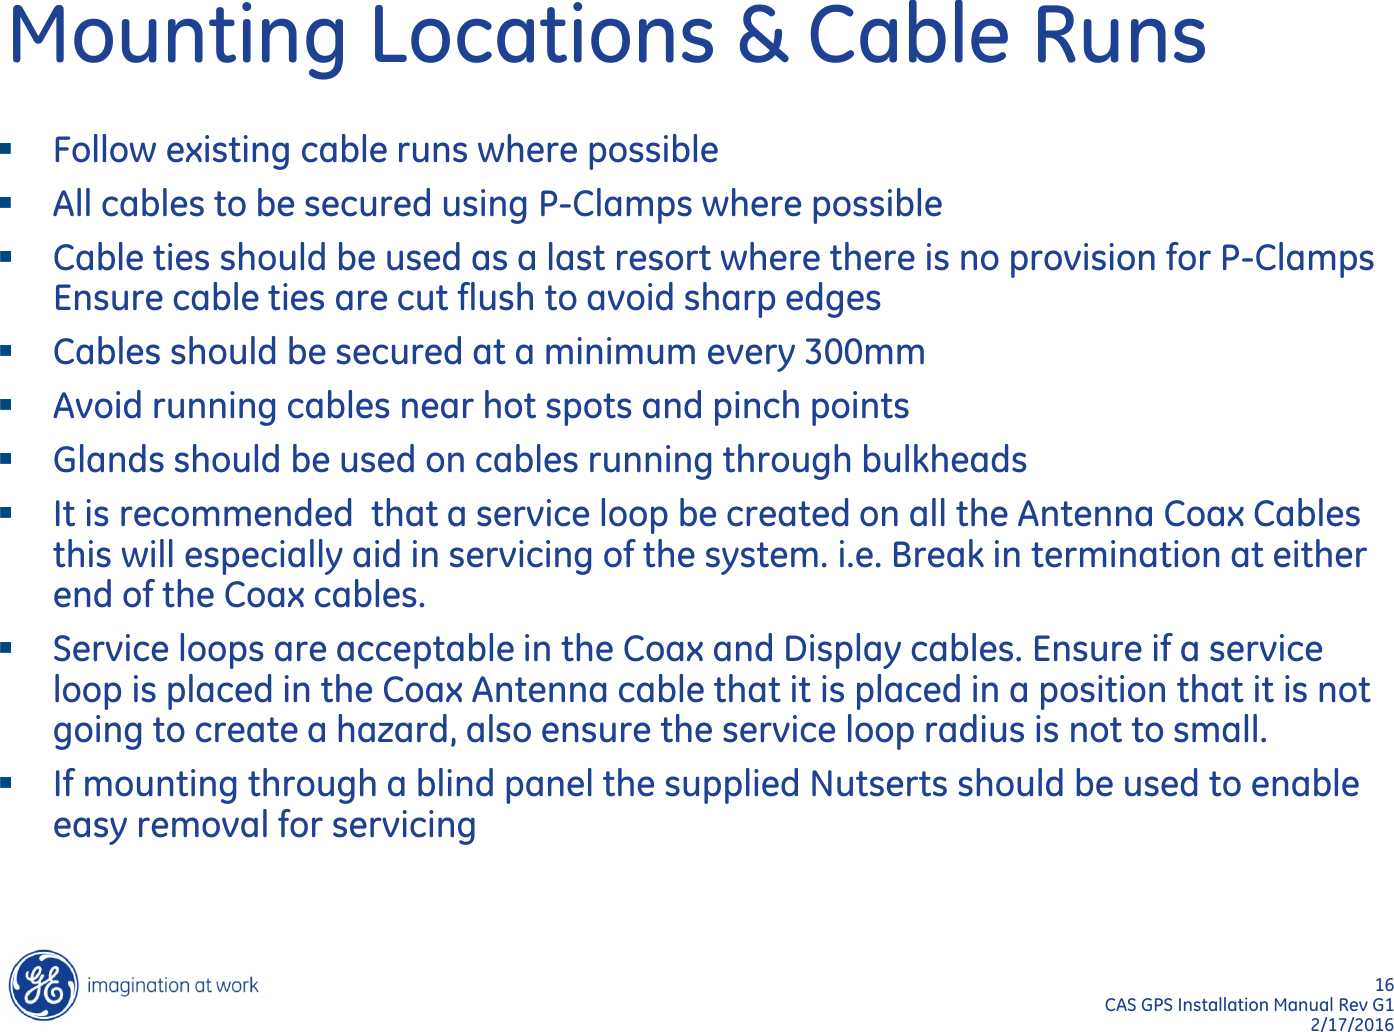 16  CAS GPS Installation Manual Rev G1 2/17/2016 Mounting Locations &amp; Cable Runs   Follow existing cable runs where possible All cables to be secured using P-Clamps where possible Cable ties should be used as a last resort where there is no provision for P-Clamps Ensure cable ties are cut flush to avoid sharp edges Cables should be secured at a minimum every 300mm Avoid running cables near hot spots and pinch points Glands should be used on cables running through bulkheads It is recommended  that a service loop be created on all the Antenna Coax Cables this will especially aid in servicing of the system. i.e. Break in termination at either end of the Coax cables.    Service loops are acceptable in the Coax and Display cables. Ensure if a service loop is placed in the Coax Antenna cable that it is placed in a position that it is not going to create a hazard, also ensure the service loop radius is not to small. If mounting through a blind panel the supplied Nutserts should be used to enable easy removal for servicing  